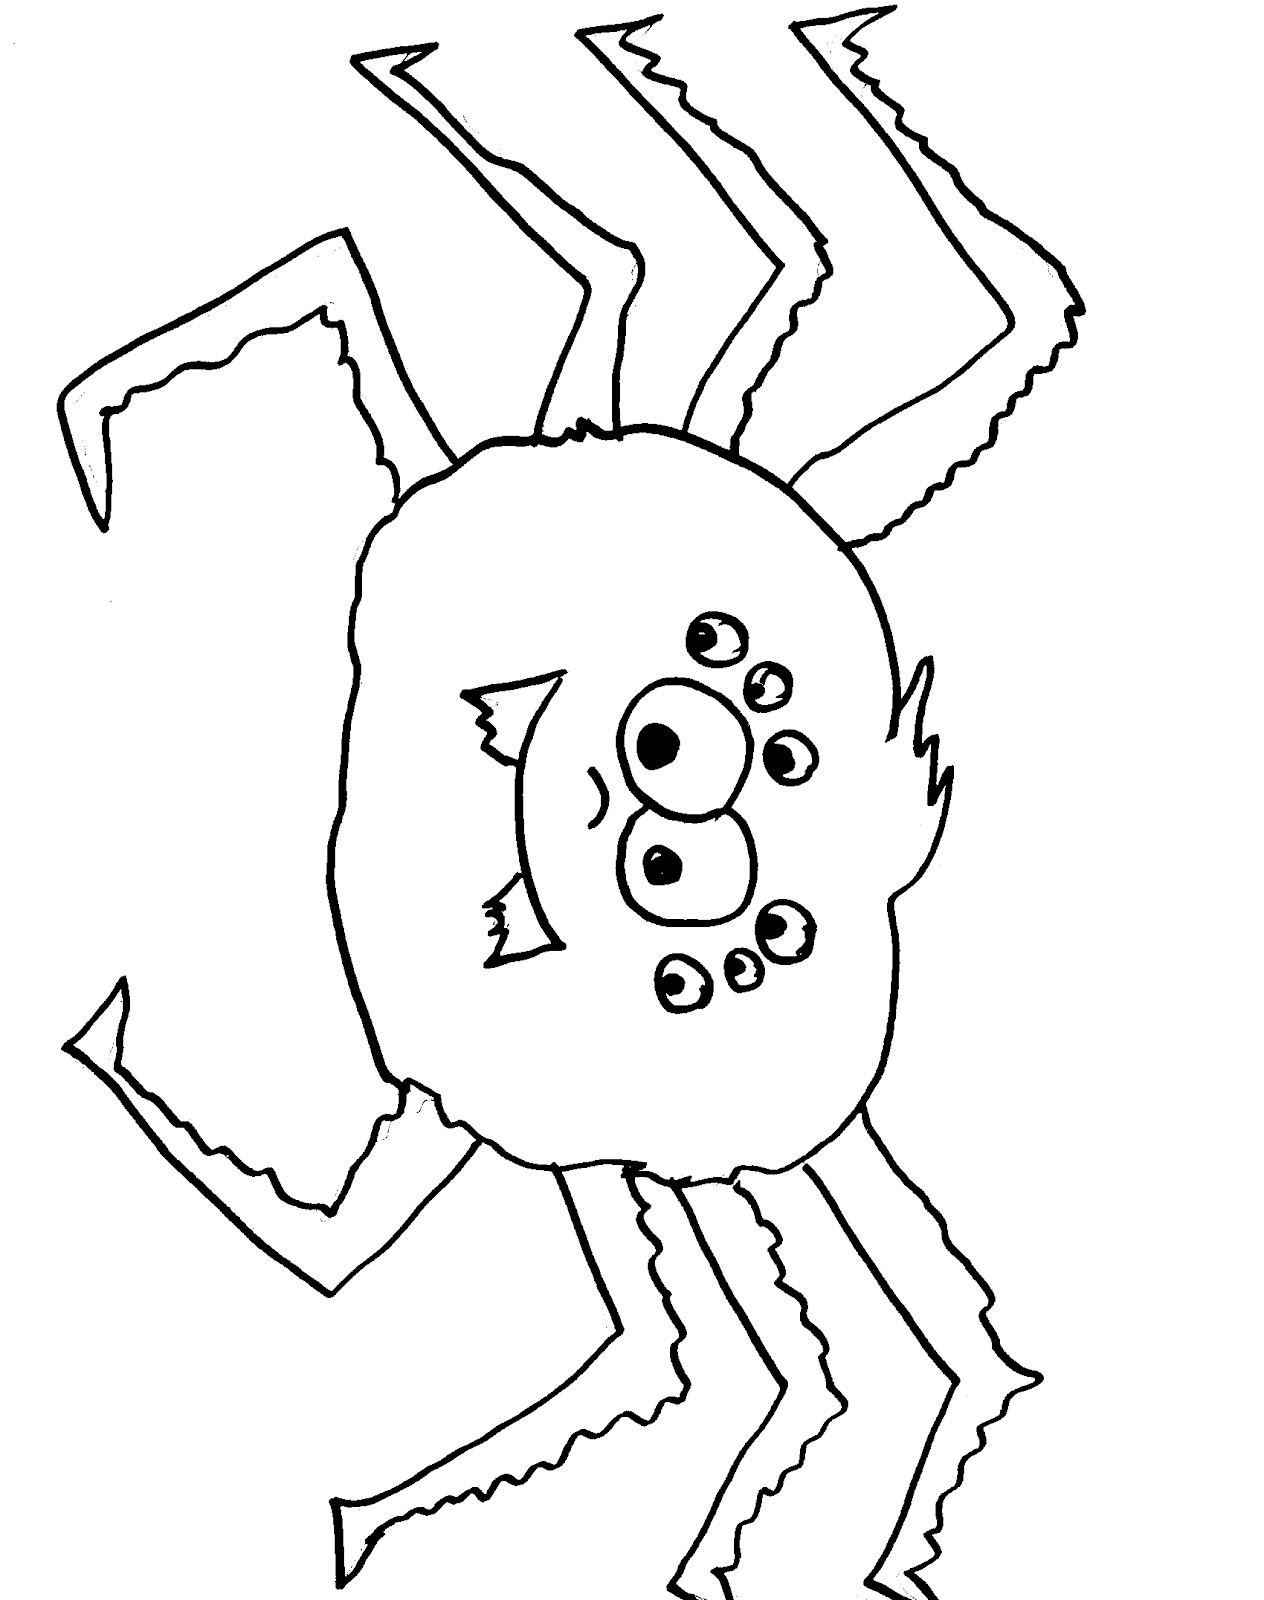 Halloween+Coloring+Pages13 Coloring Kids - Coloring Kids